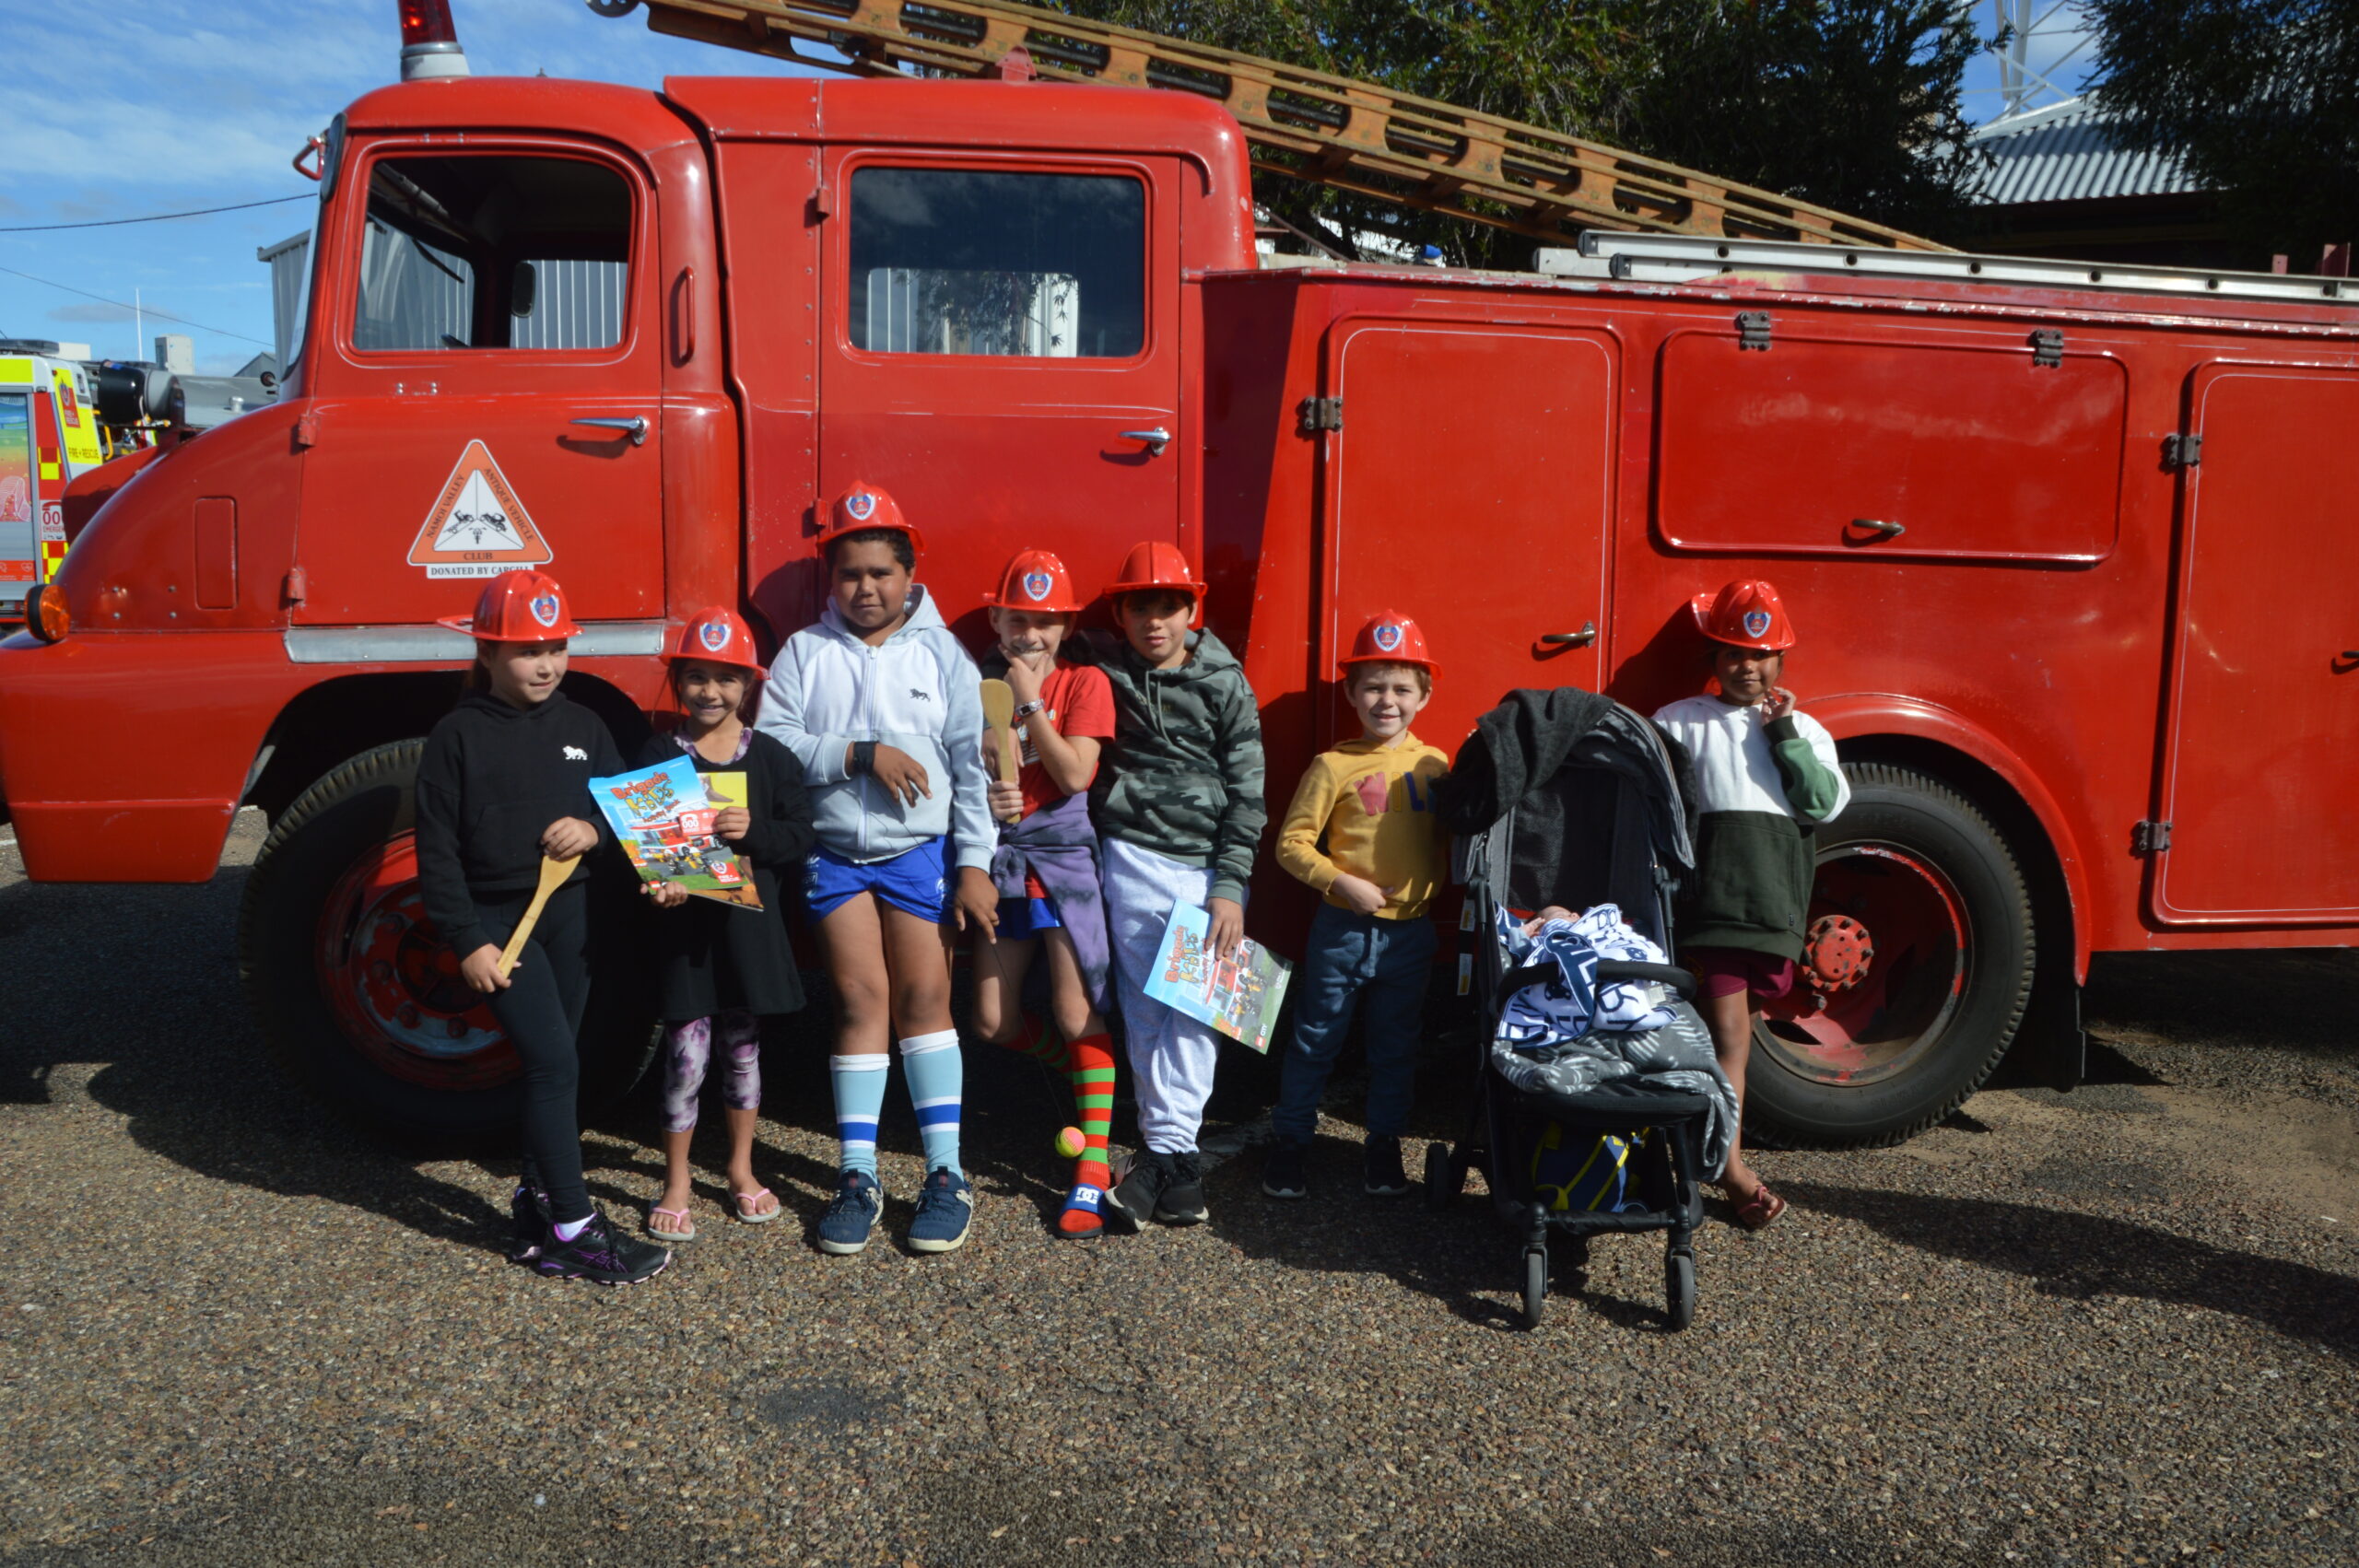 Lacee and Savannah Lawler, Tyreake Dixon, Tyran, Lucas and Chase Lawler, Rylee Toomey (in the pram) and Jahnarli Dixon at Narrabri Fire and Rescue open day on Saturday, May 15.